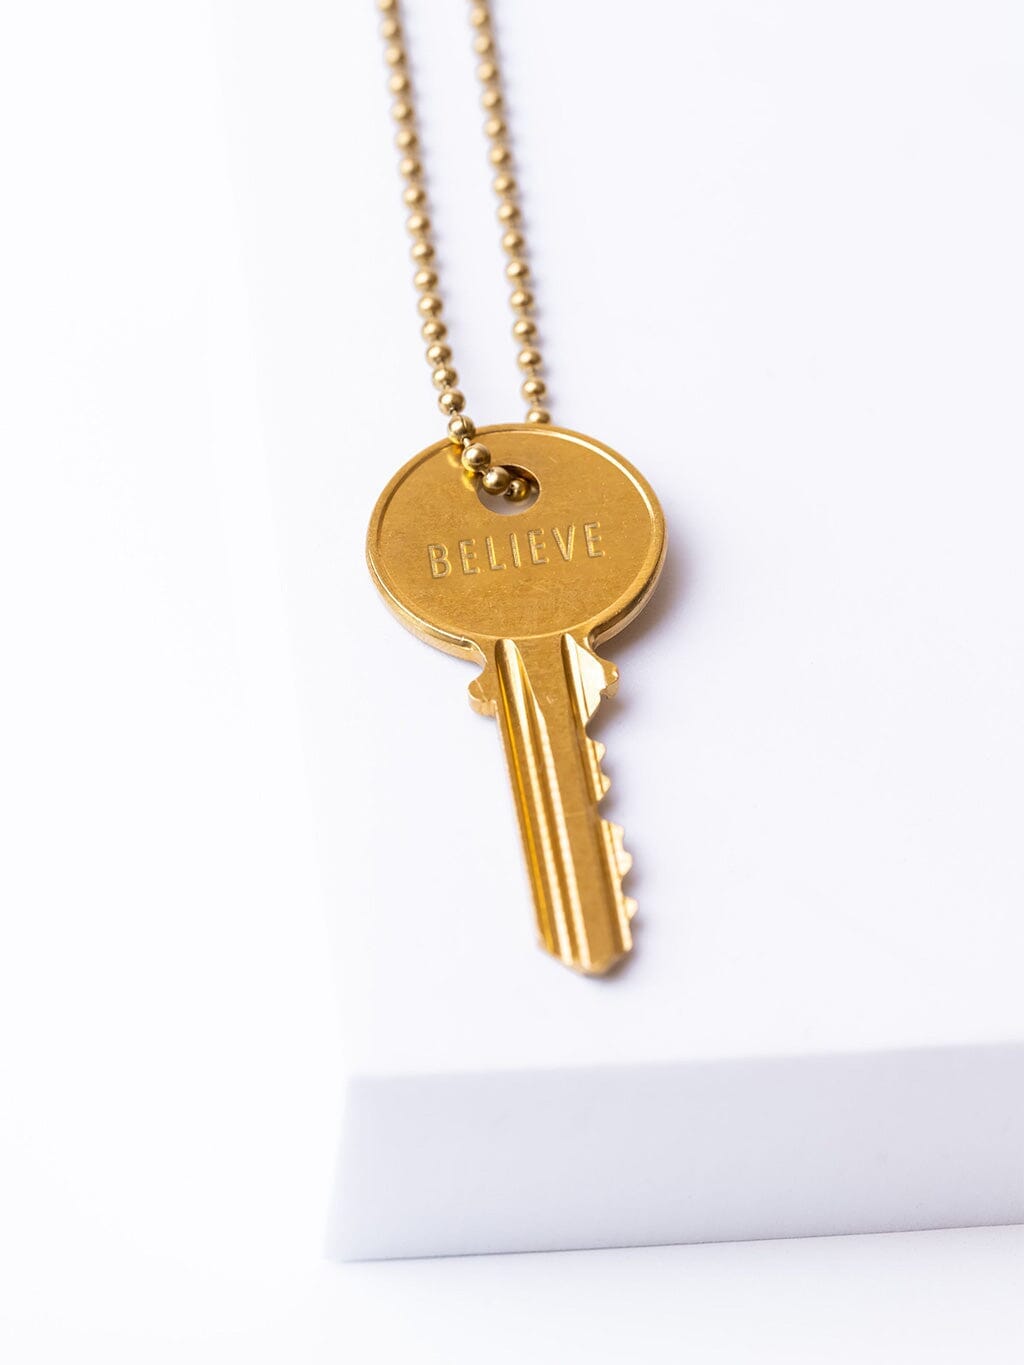 N - Classic Ball Chain Key Necklace Necklaces The Giving Keys Gold Ball 